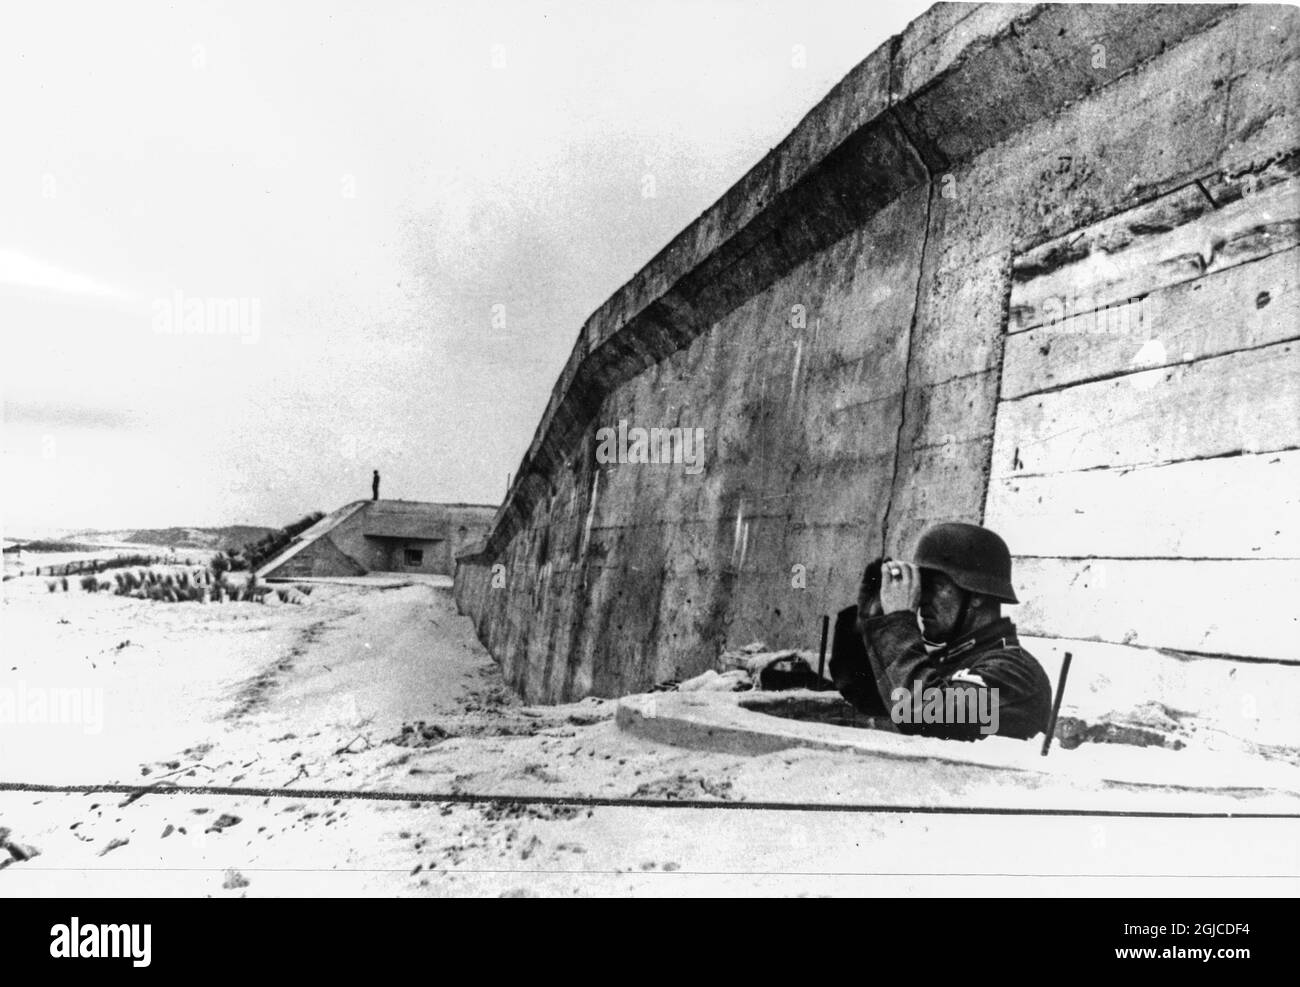 ATLANTIC COAST, FRANCE 1940-1944 Soldier on post at the fortifications in the Atlantic Wall, during the German occupation of parts of France during the Second World War. Photo: AB Text & Bilder / SVT / Kod: 5600  Stock Photo